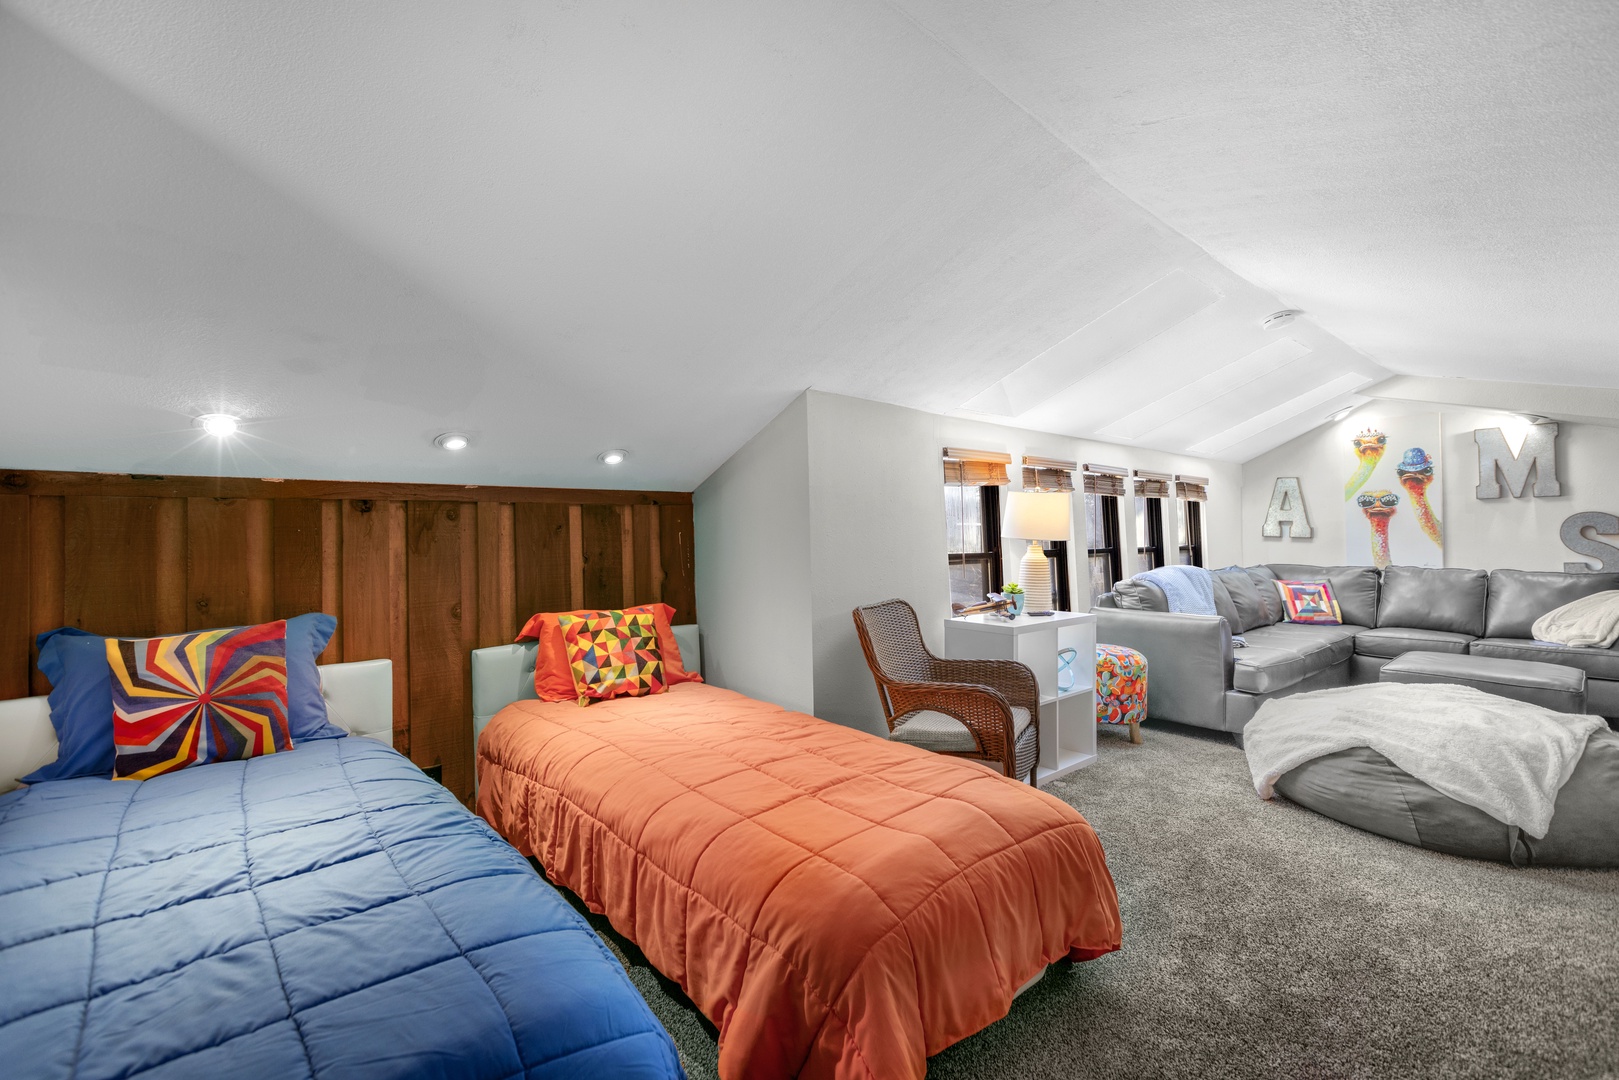 The loft features a pair of twin beds, cozy tv area, and convenient half bath